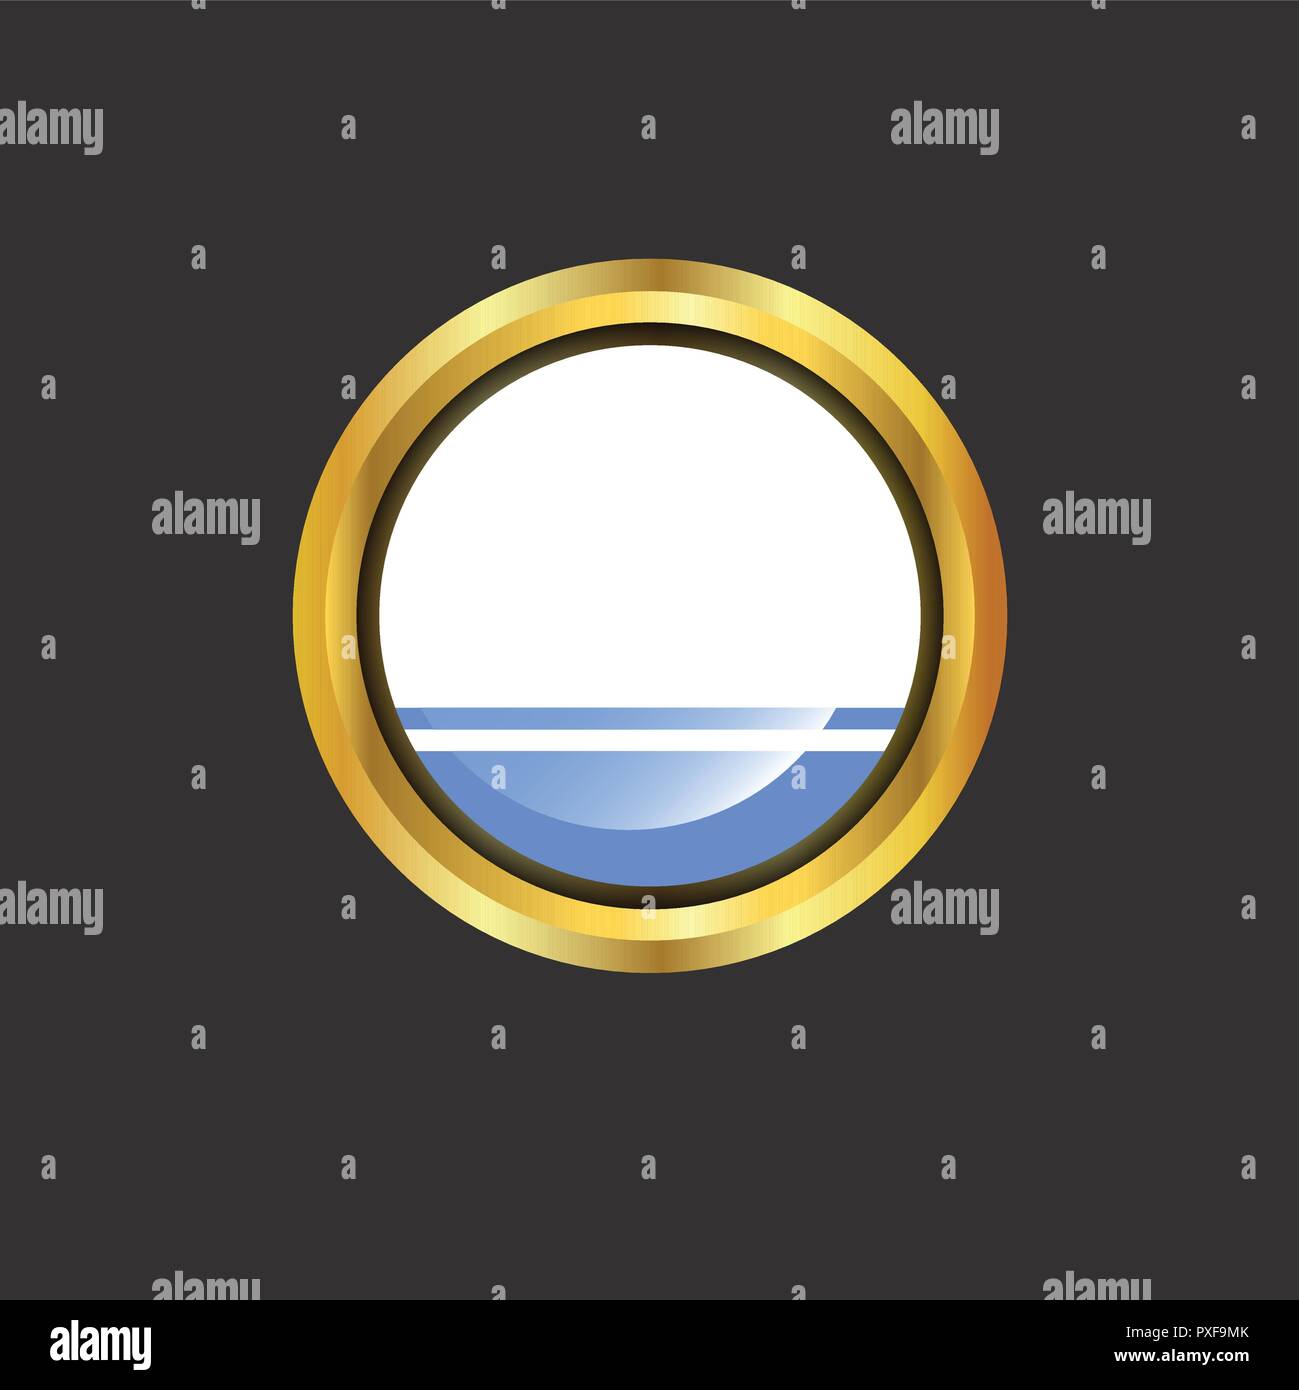 Altai flag Stock Vector Images - Alamy